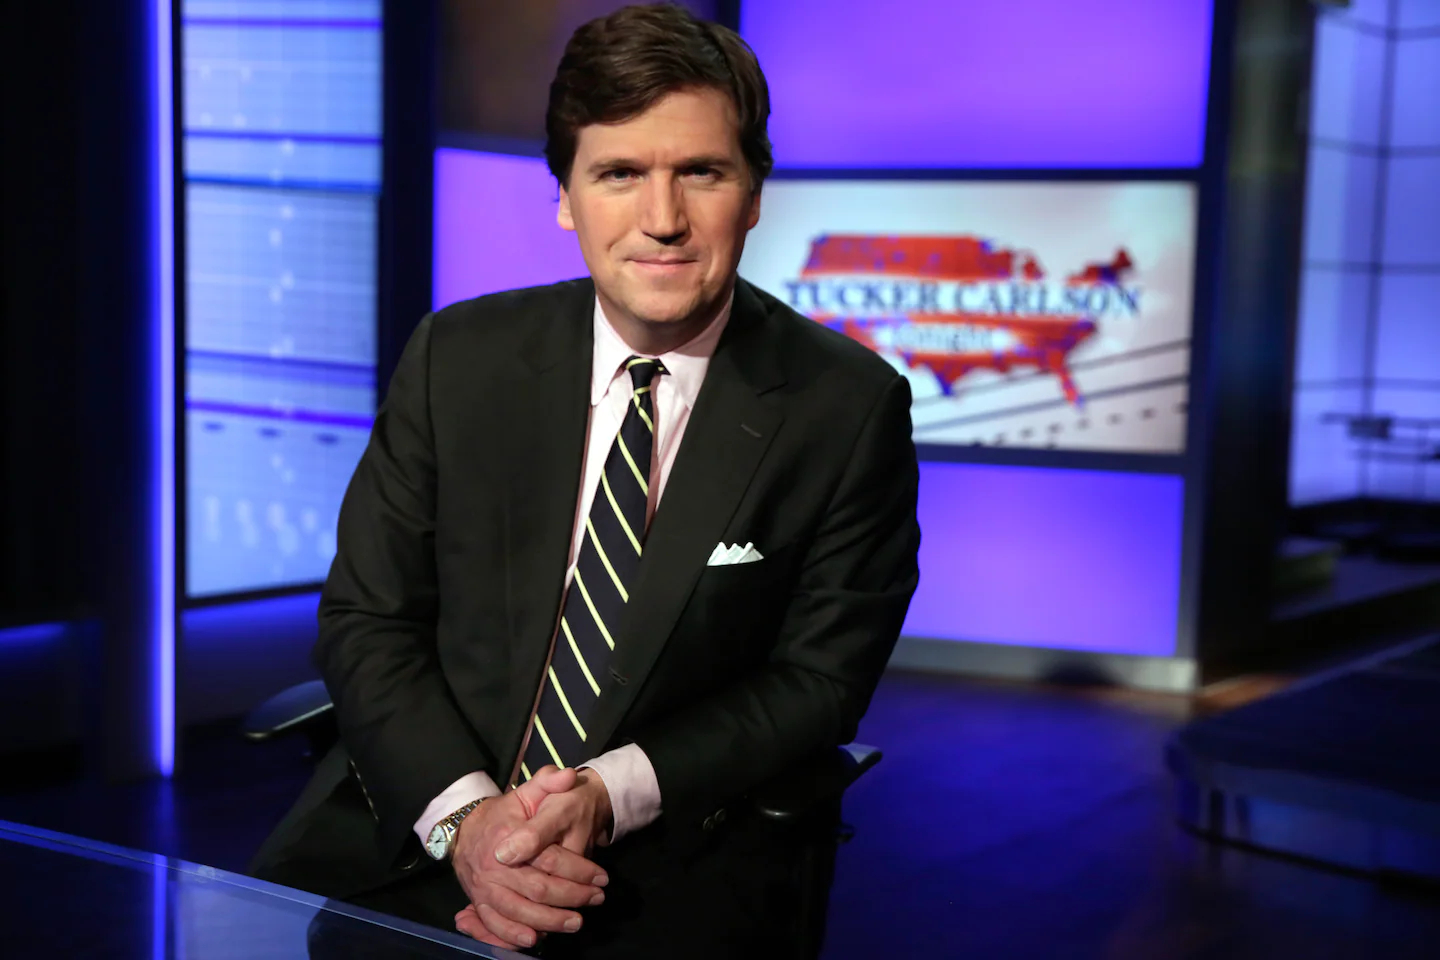 Tucker Carlson inadvertently helped raise ,000 for abortion rights